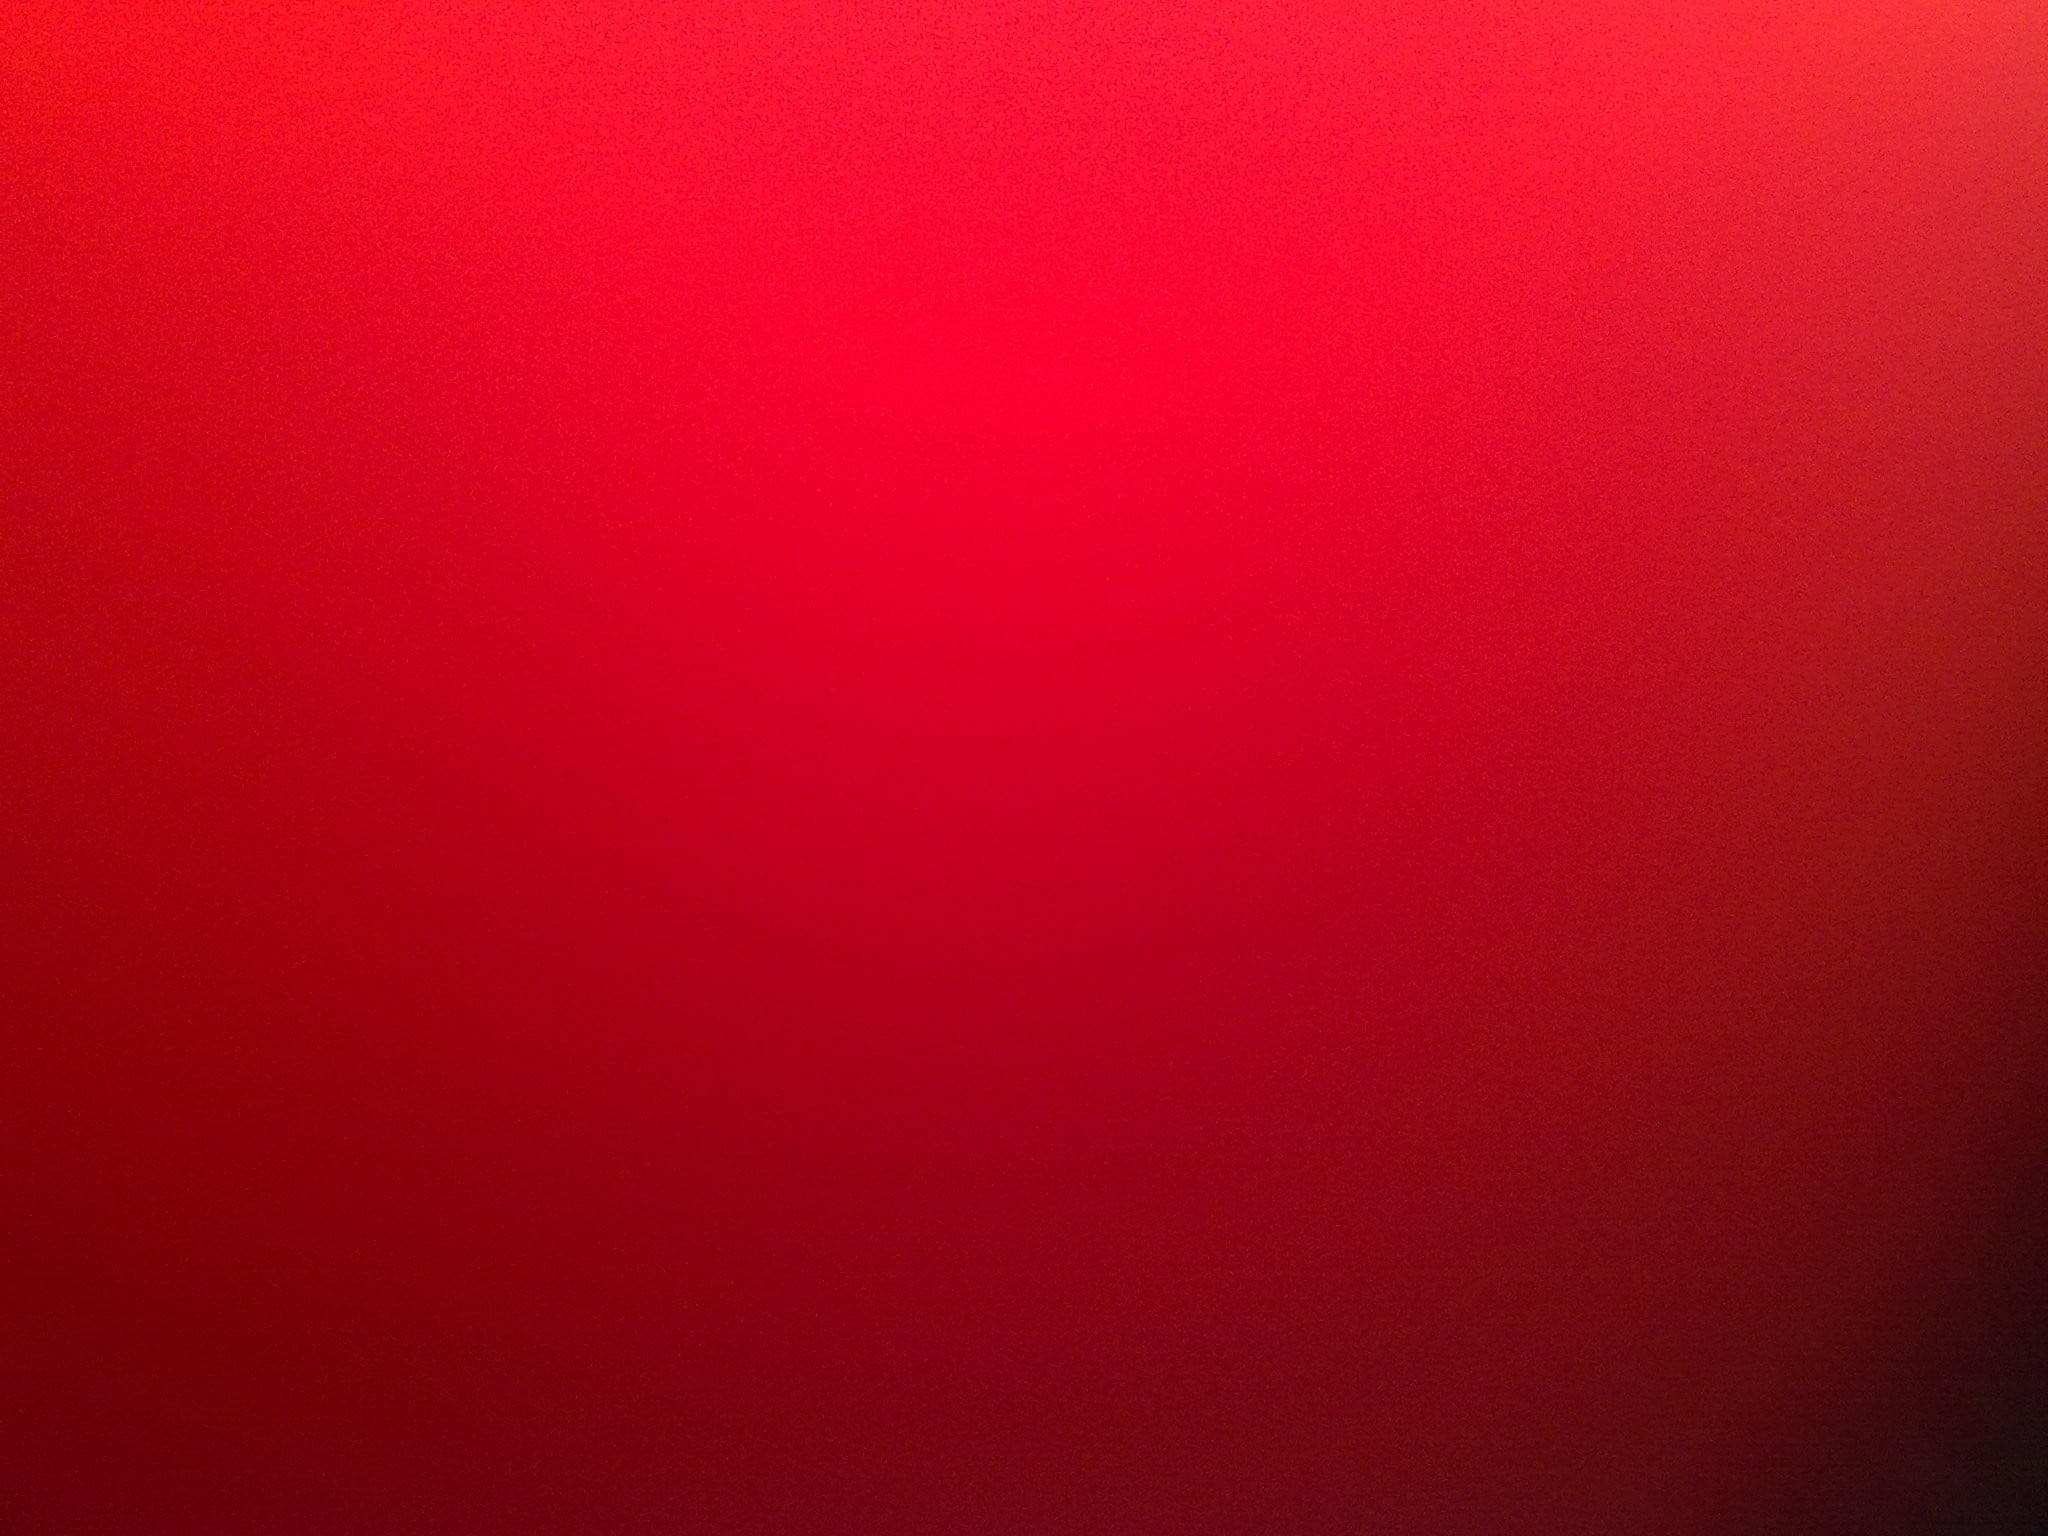 simple, red background